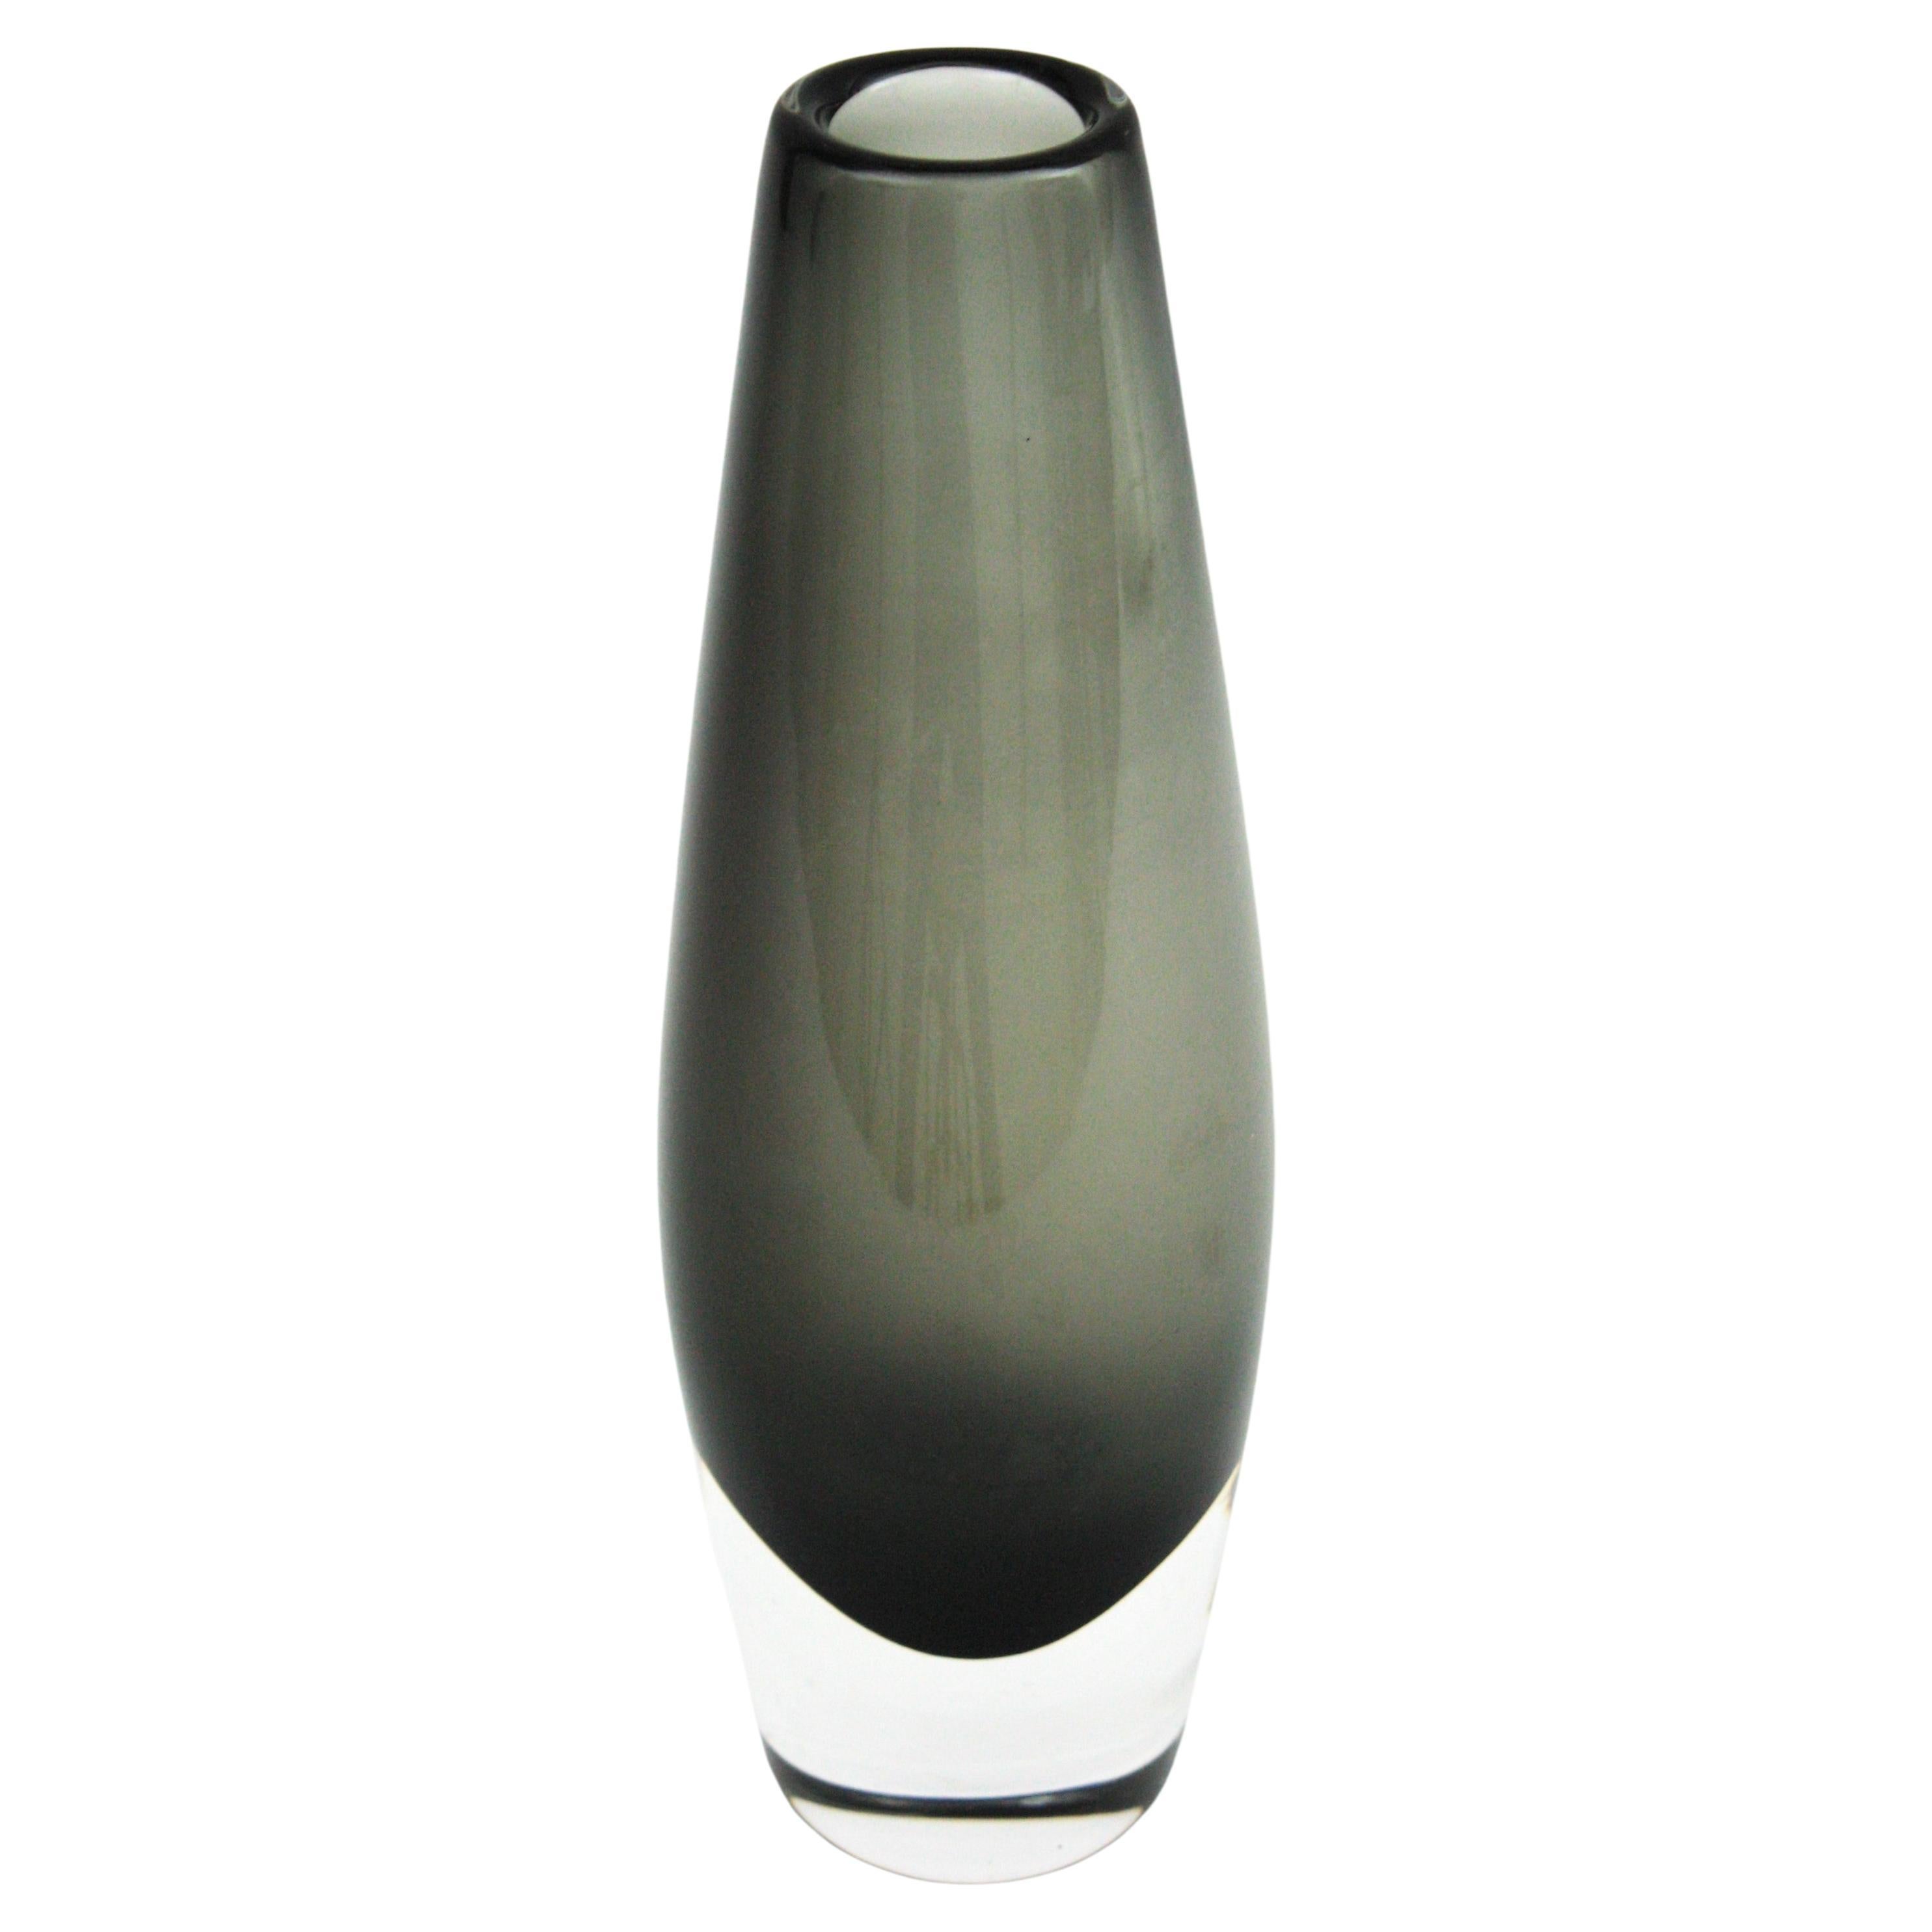 Scandinavian Modern Sommerso Smoked Grey Tall Glass Vase by Nils Landberg for Orrefors

Elegant smoked grey and clear sommerso glass vase. Designed by Nils Landberg and manufactured by Orrefors. Sweden, 1960s
This hand blown glass vase has a